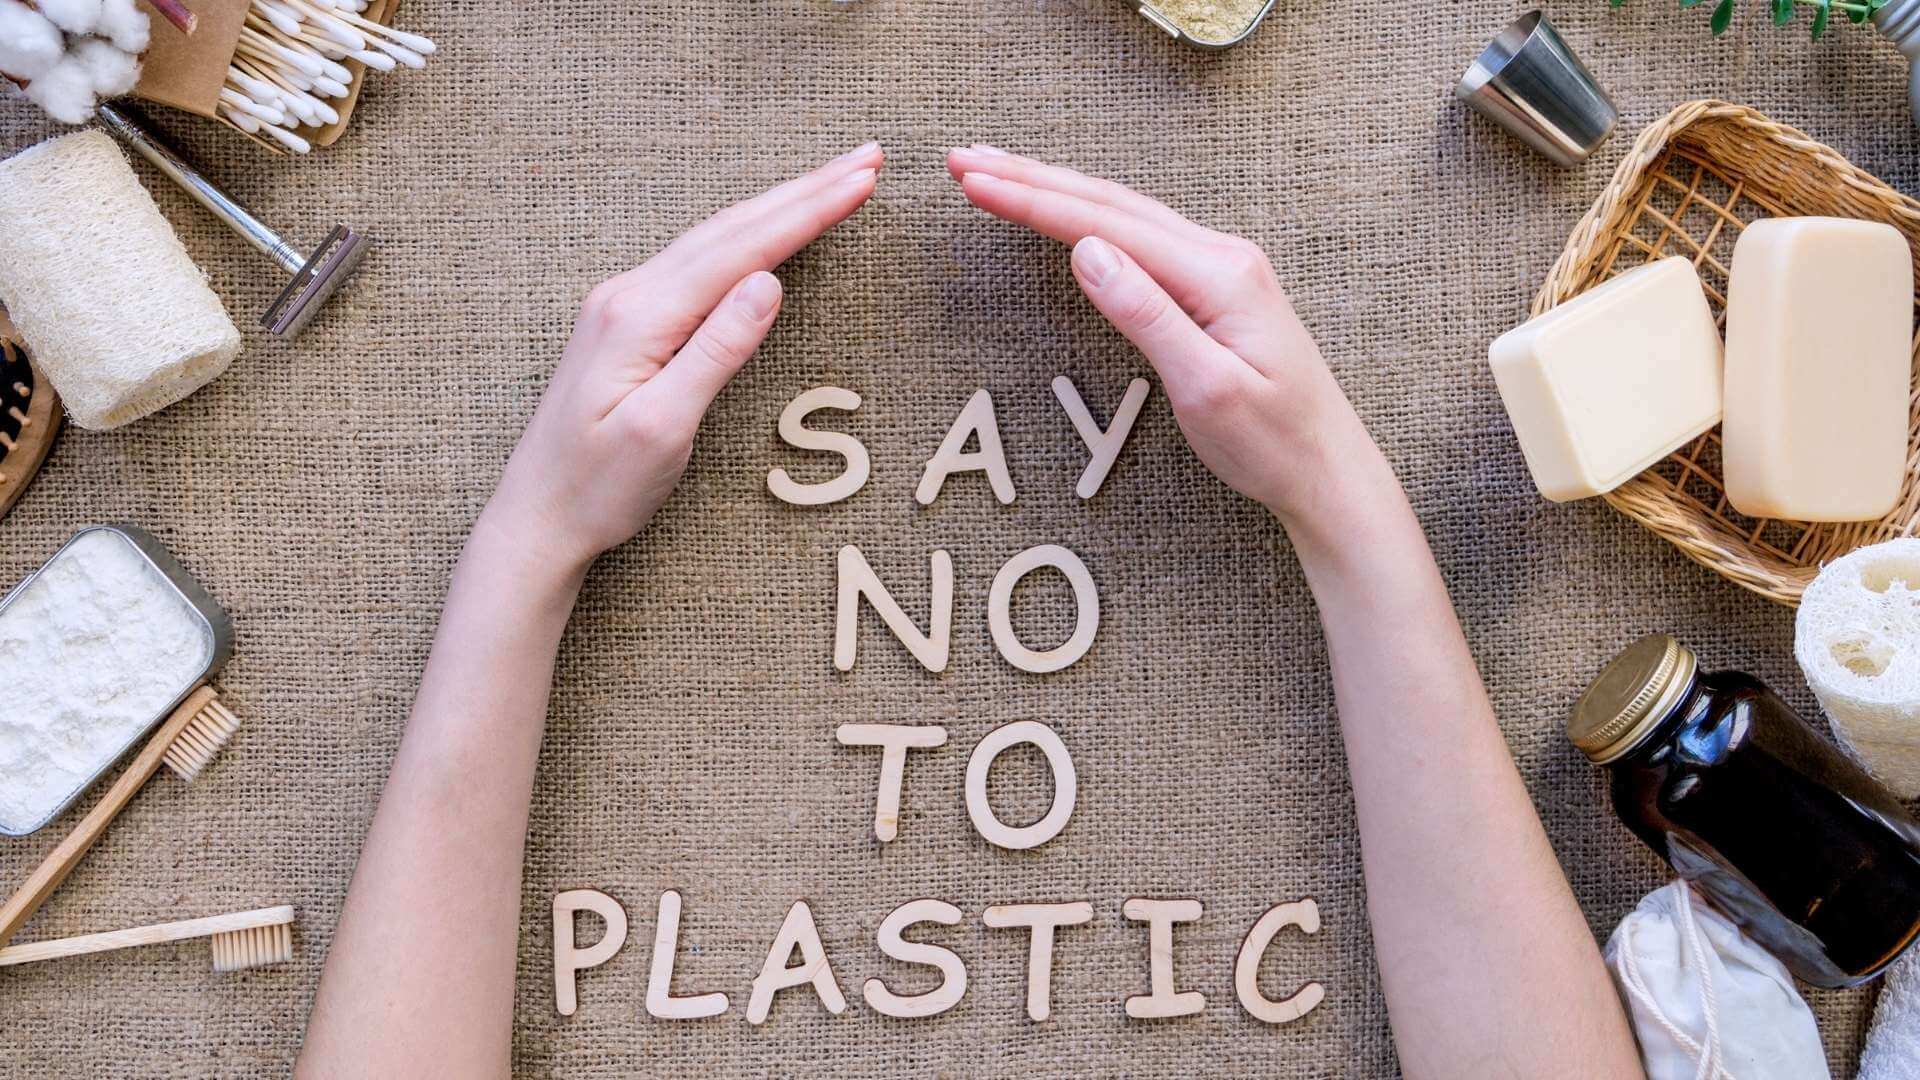 Recycled plastic will soon be the only choice say designers